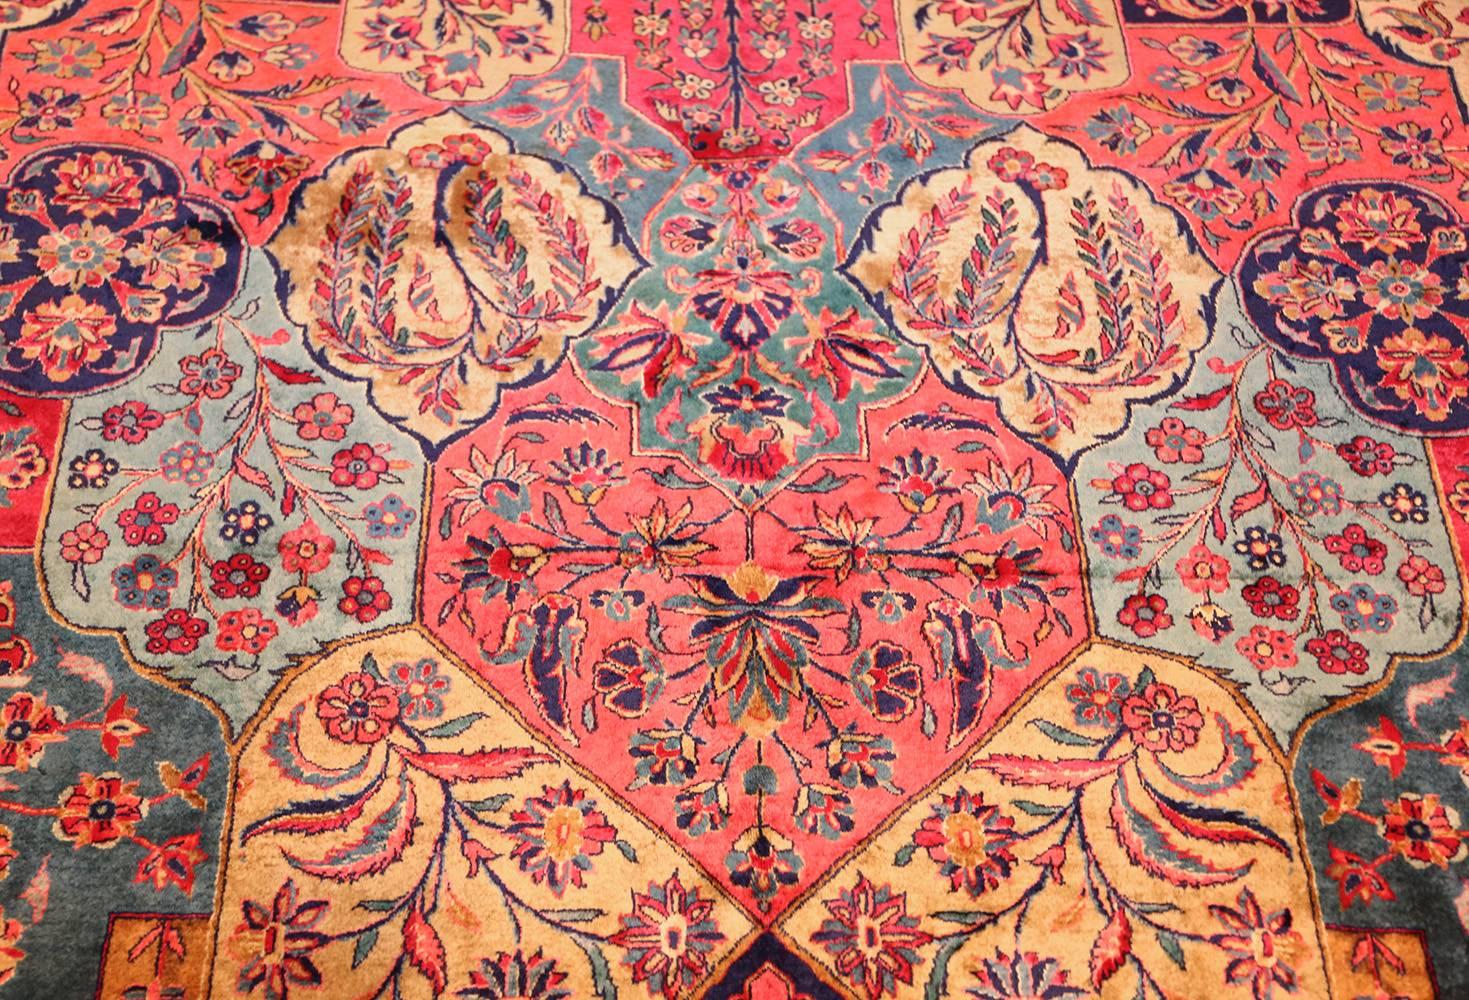 Magnificent Oversized Antique Kashan Persian Rug, Country of Origin / Rug Type: Persian Rug, Circa Date: 1900 -Size: 13 ft 5 in x 21 ft 7 in (4.09 m x 6.58 m)

The vibrant colors of this antique Kashan carpet were created around the turn of the